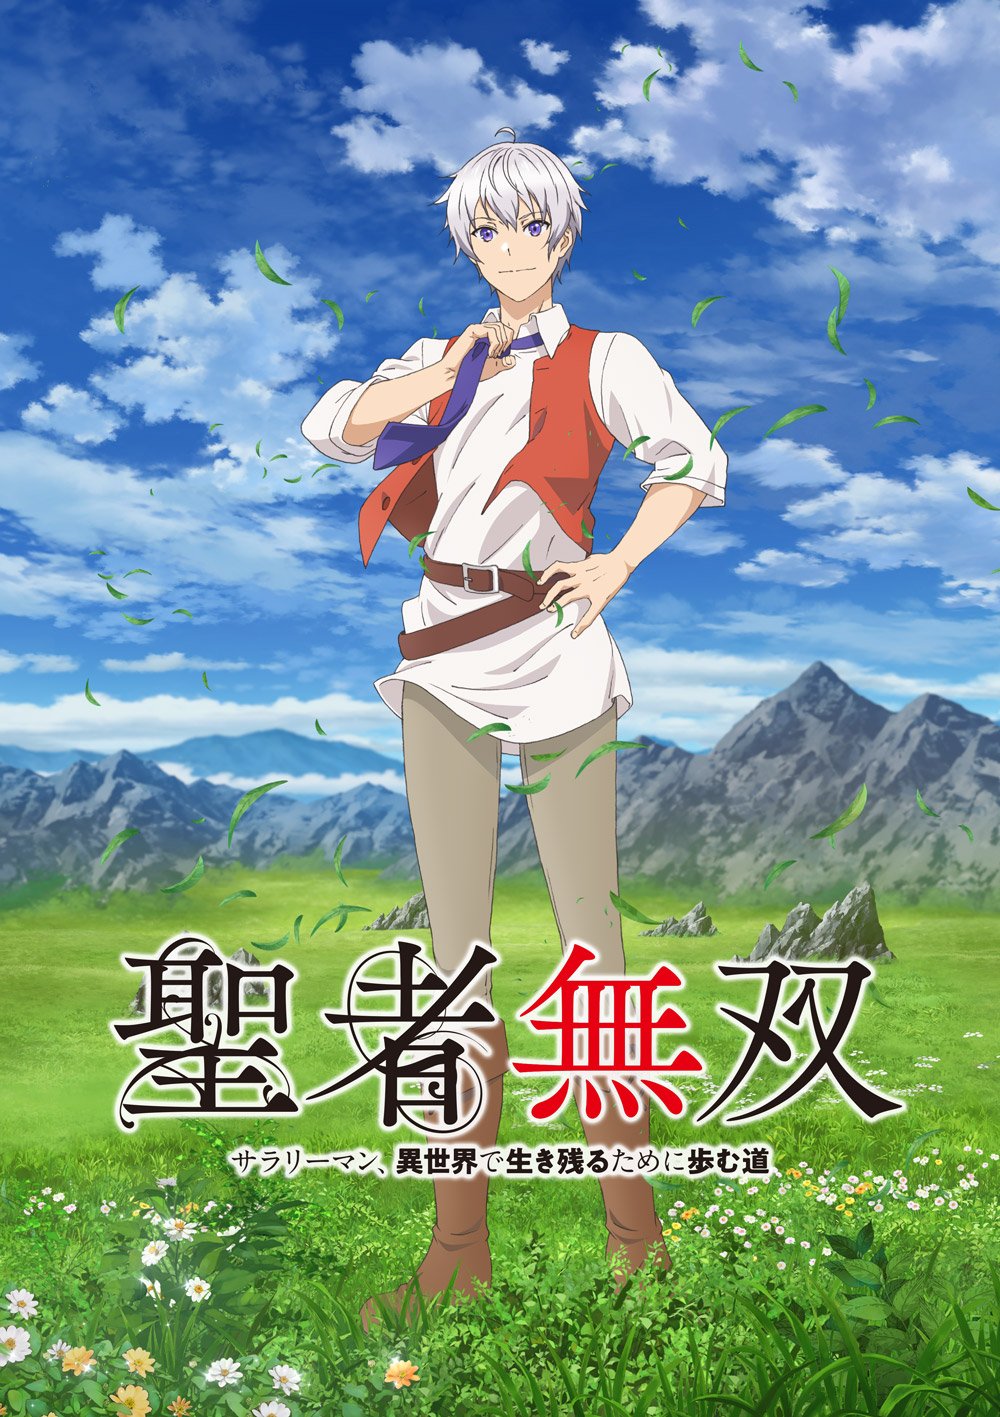 Key Visuals, Main Cast And July Premiere Revealed of The Great Cleric Anime